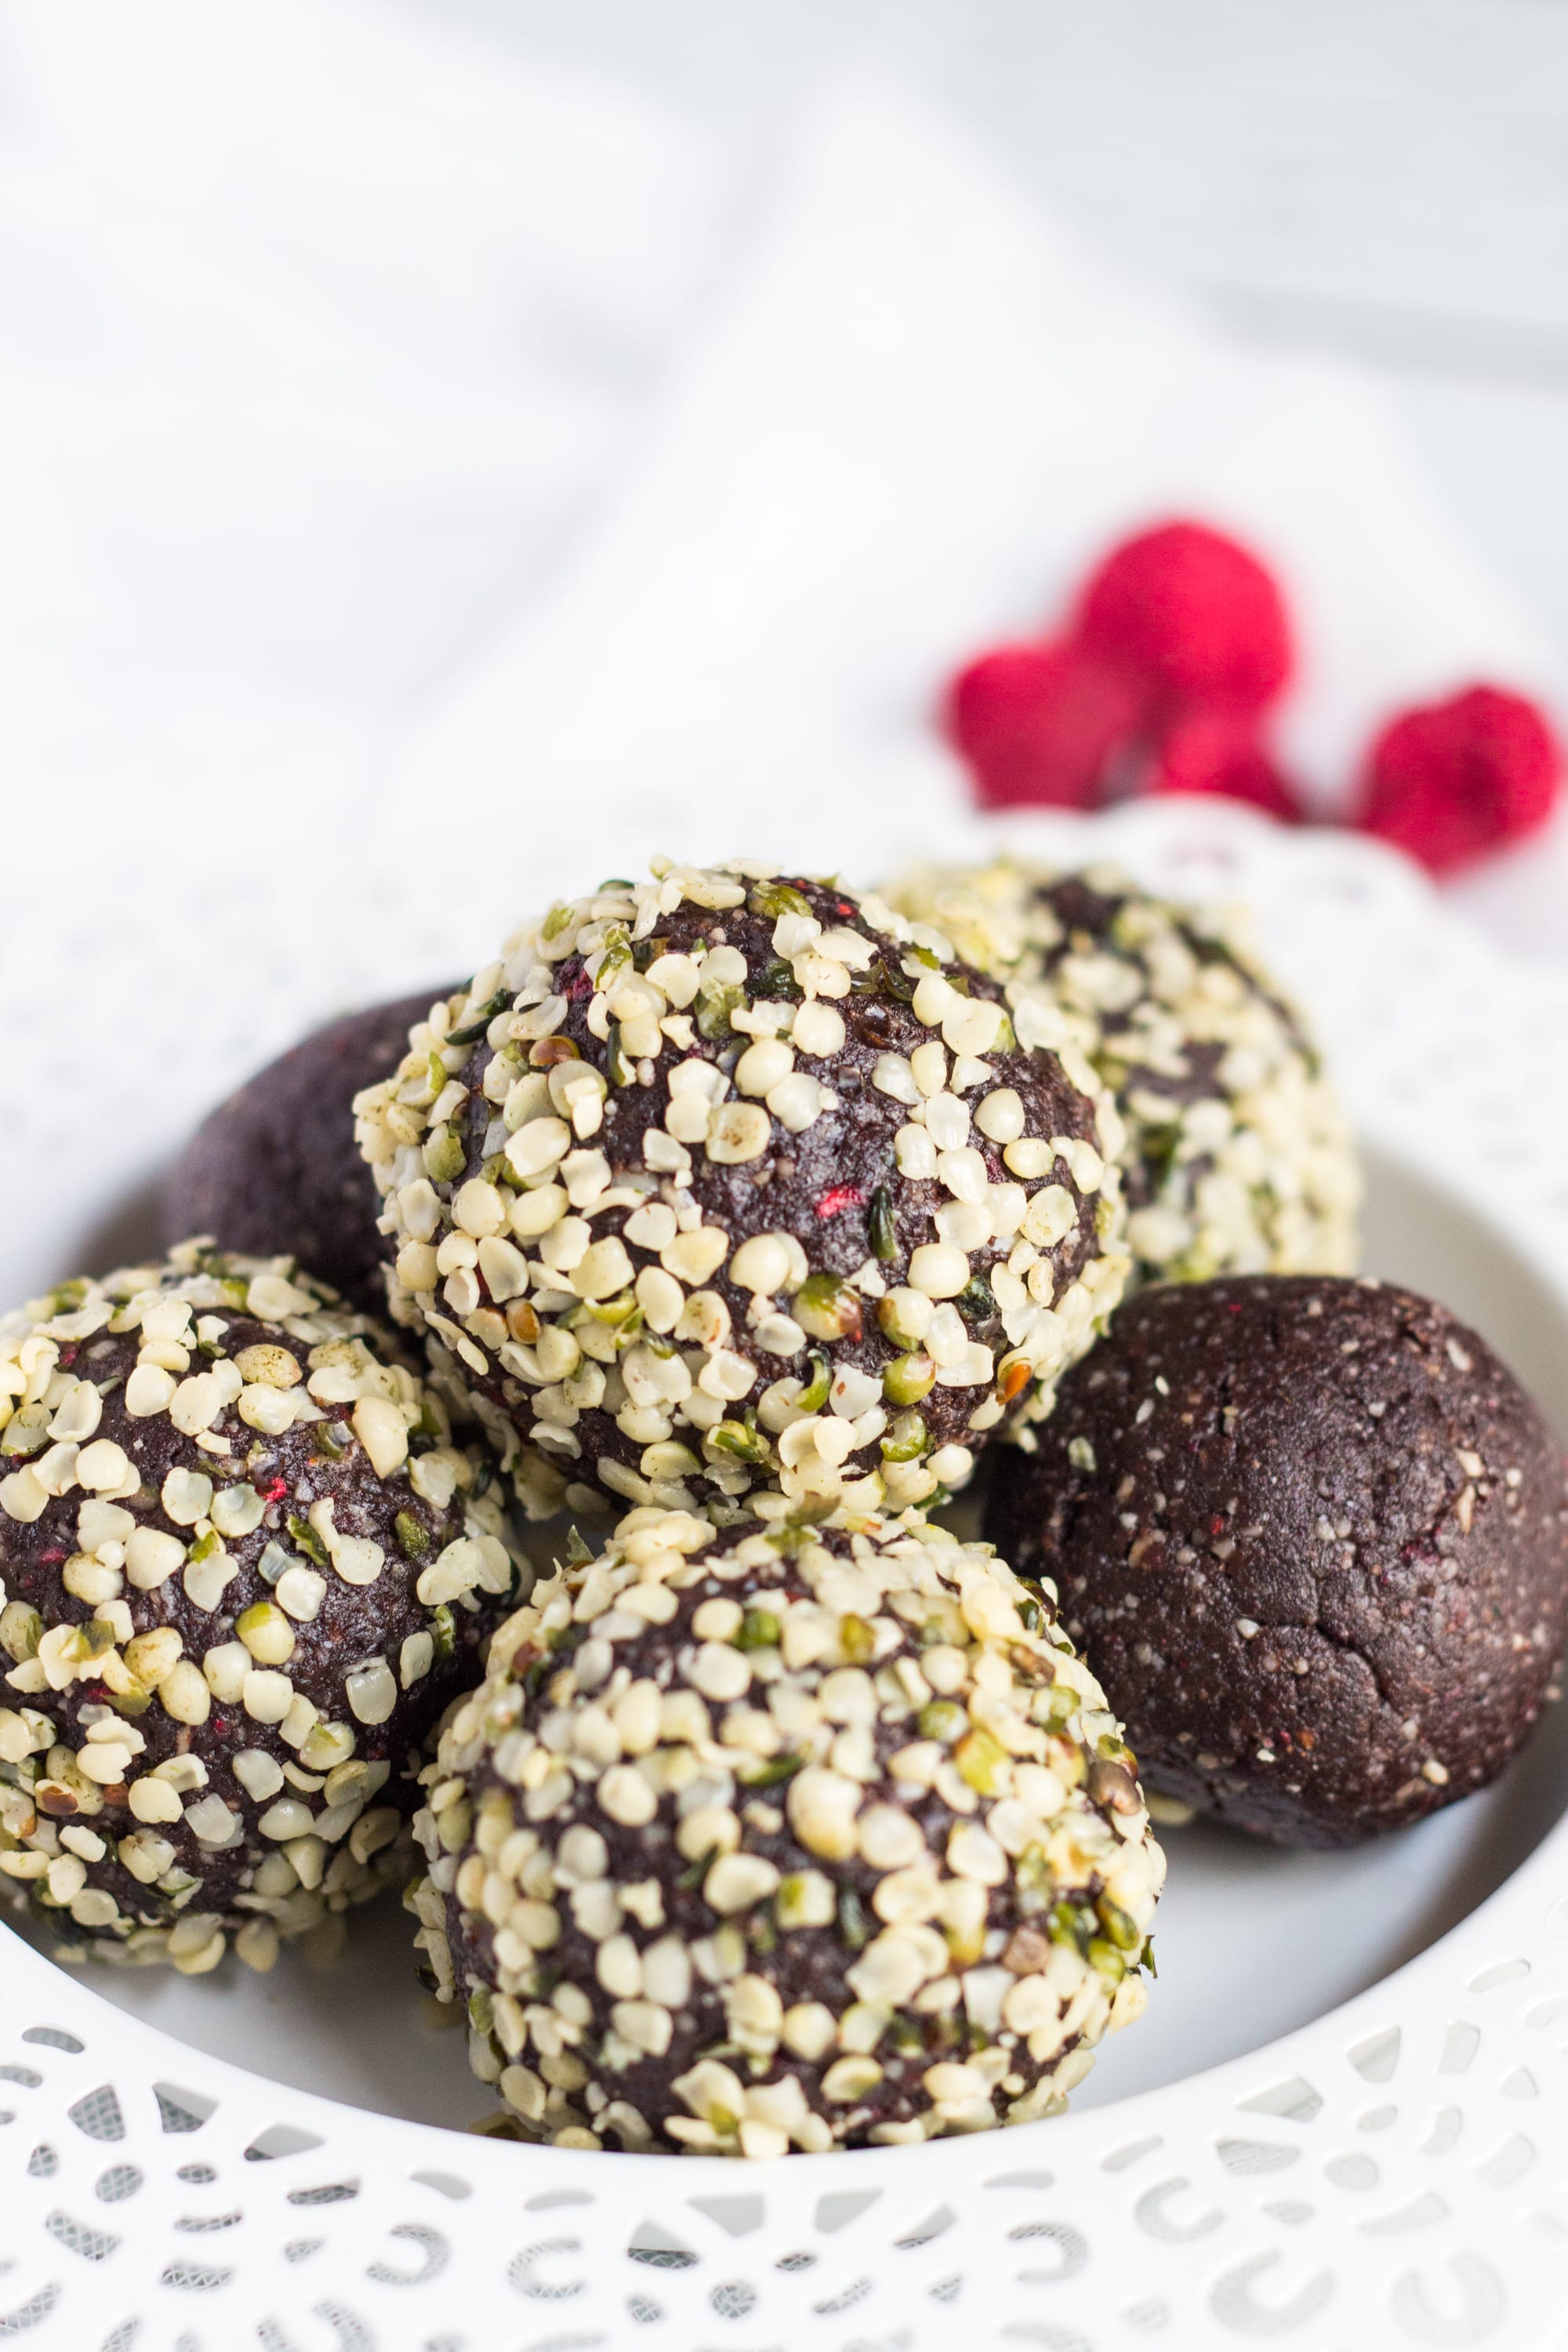 Nut Free Raspberry Bliss Balls. Dense, fudgy & great for tucking into kids lunchboxes. An easy way to increase protein in the diets of picky eaters.